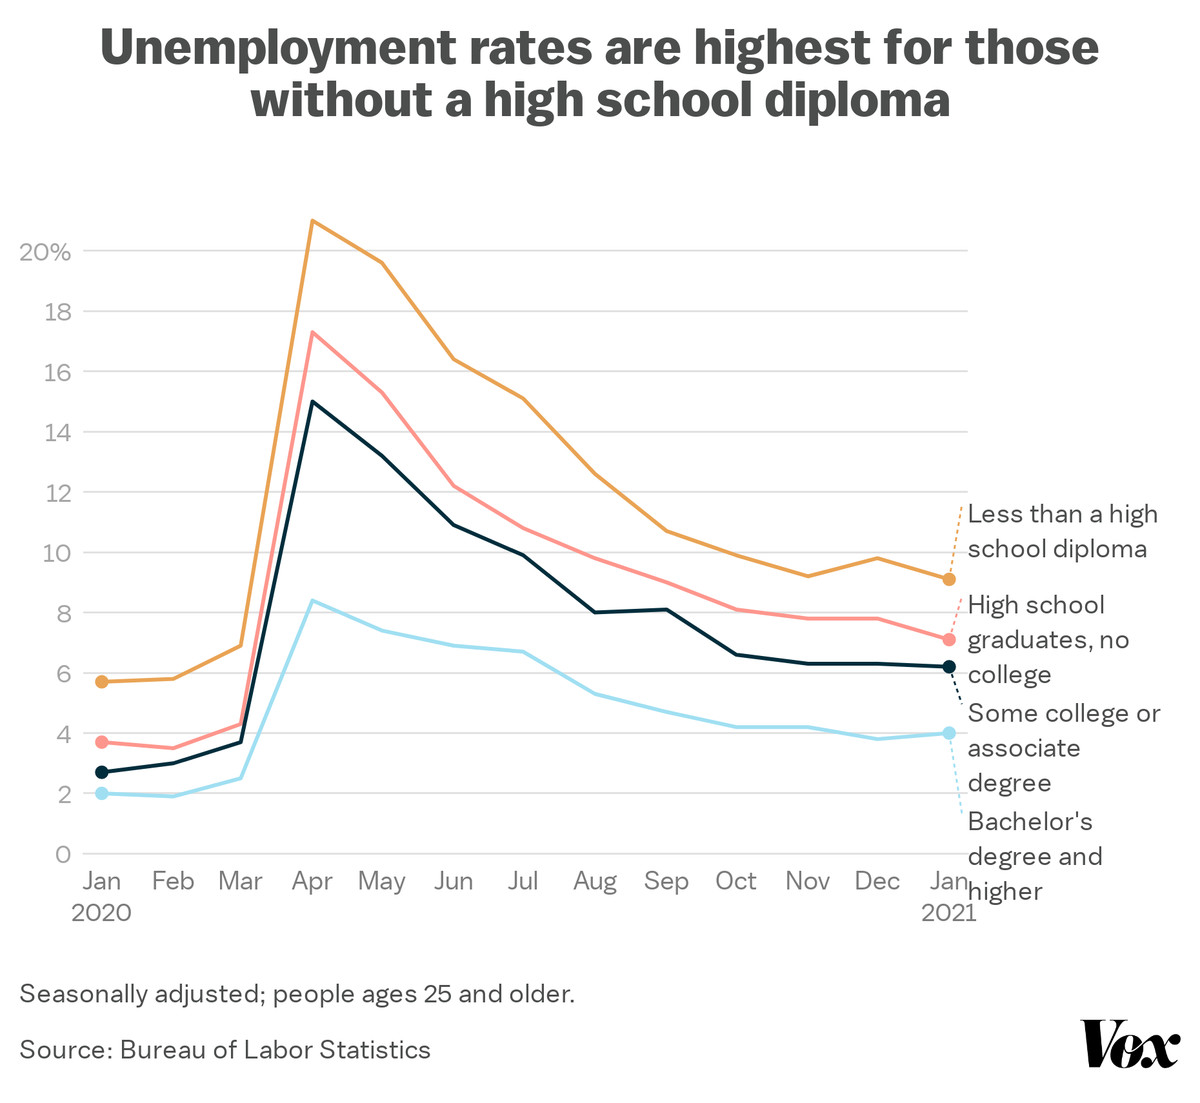 Unemployment rates are highest for those without a high school diploma